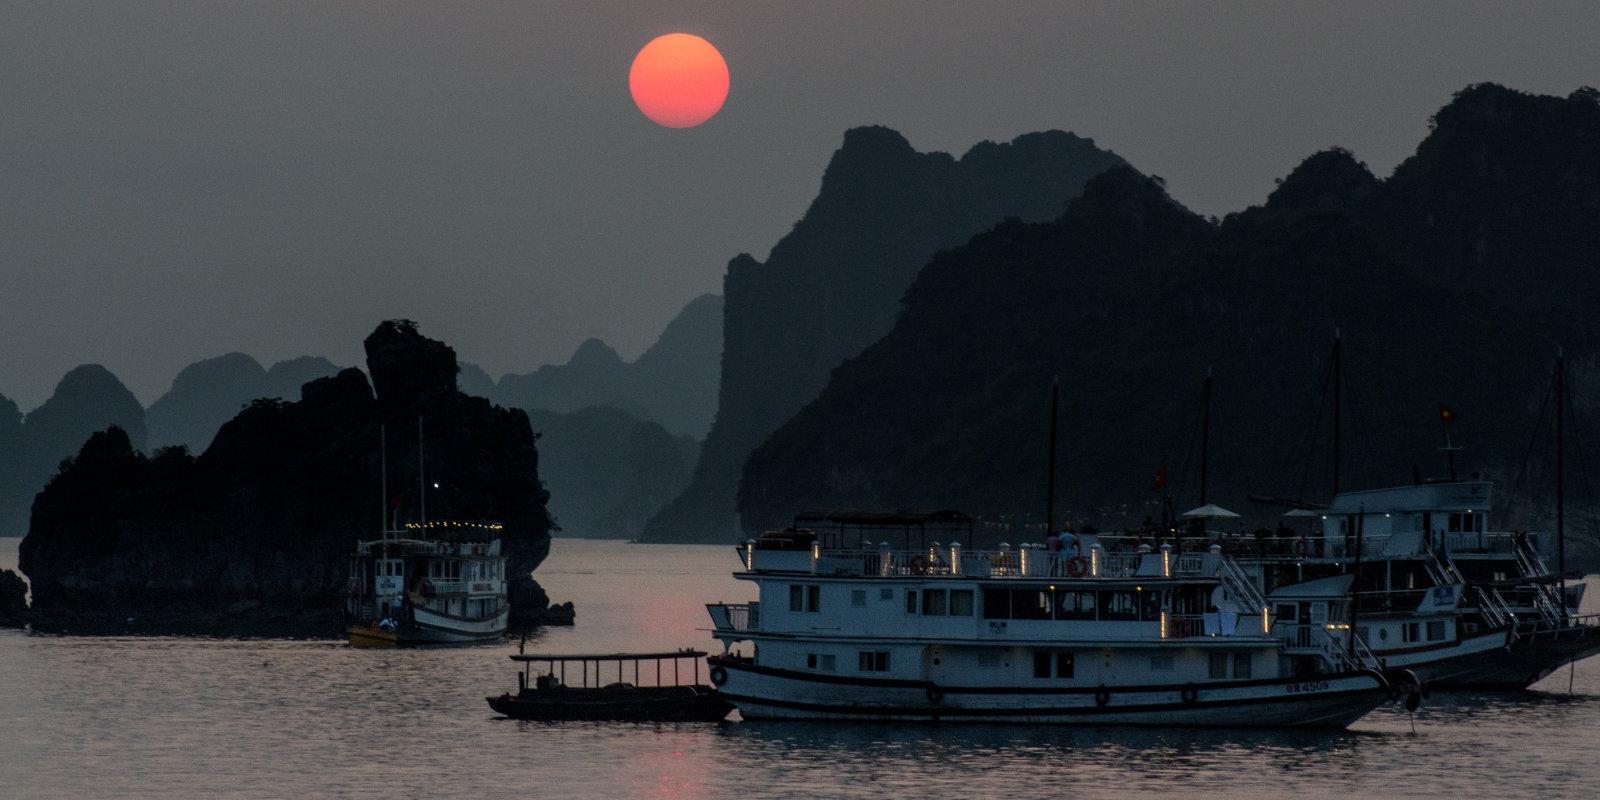 Spend some time in beautiful Ha Long Bay on this incredible gay cruise